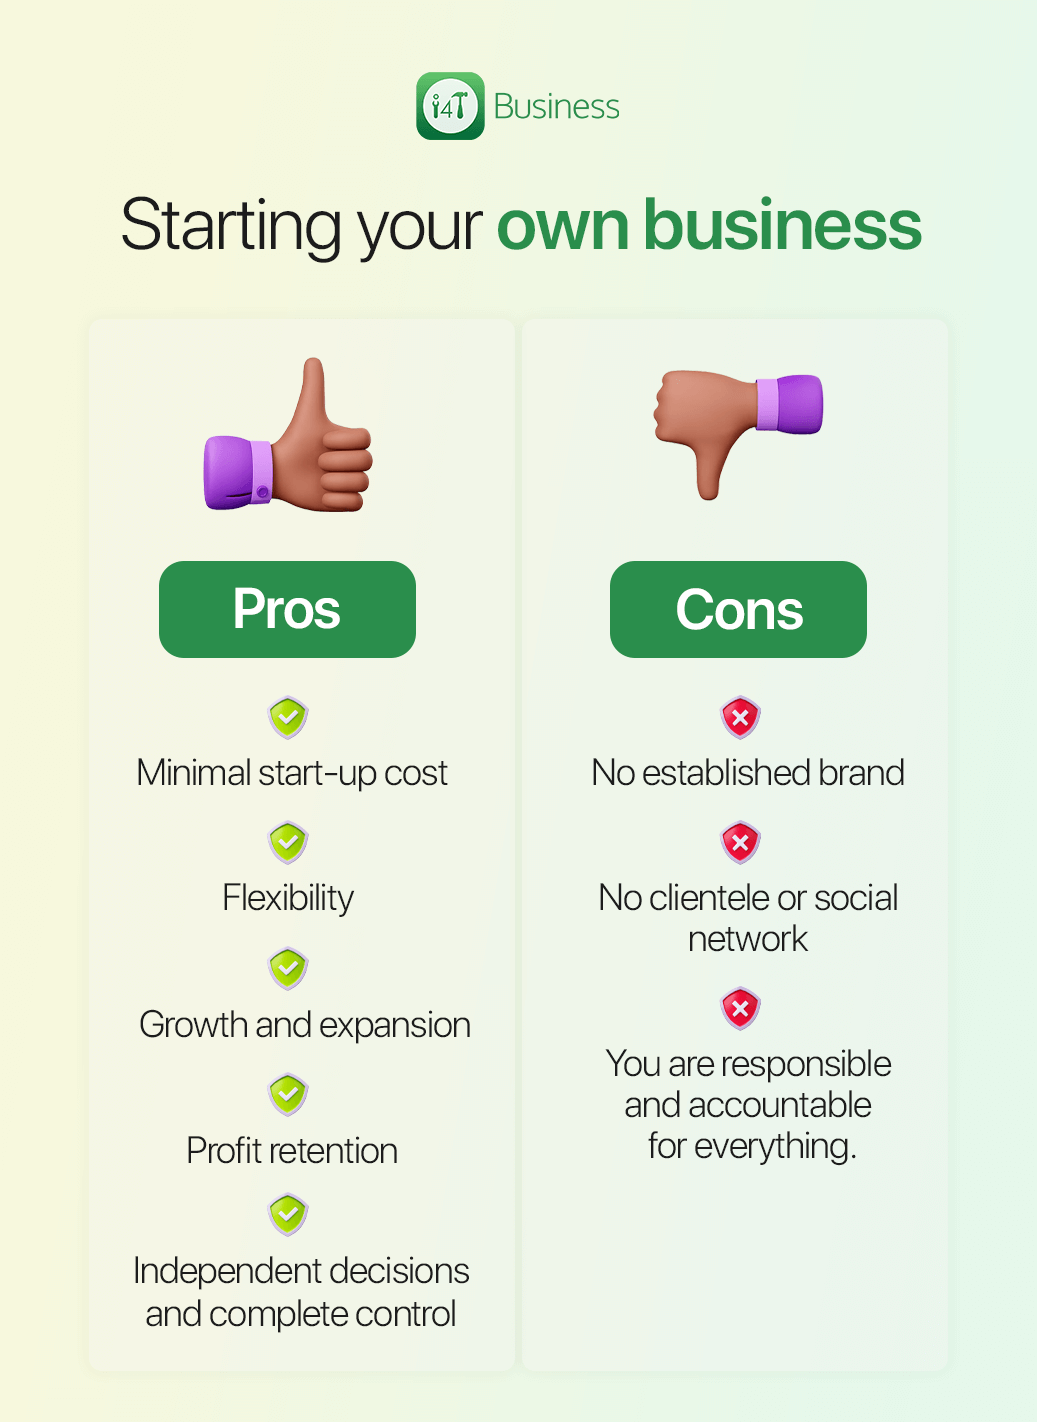 How-to-start-your-business